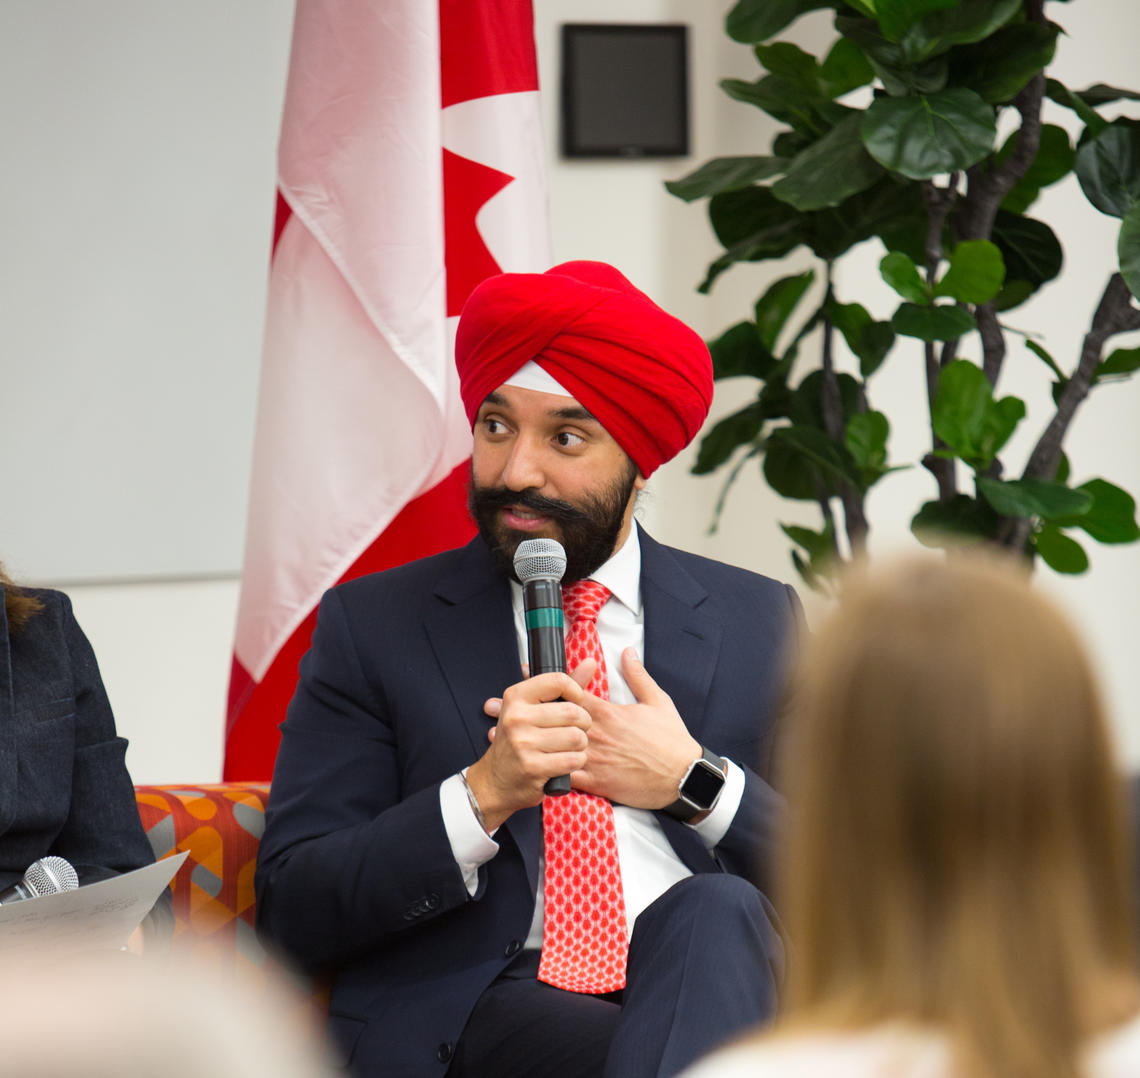 “We cannot afford to leave 50 per cent of our population on the sidelines. We must engage women in participating in a more meaningful way in the workforce,” said Navdeep Bains.